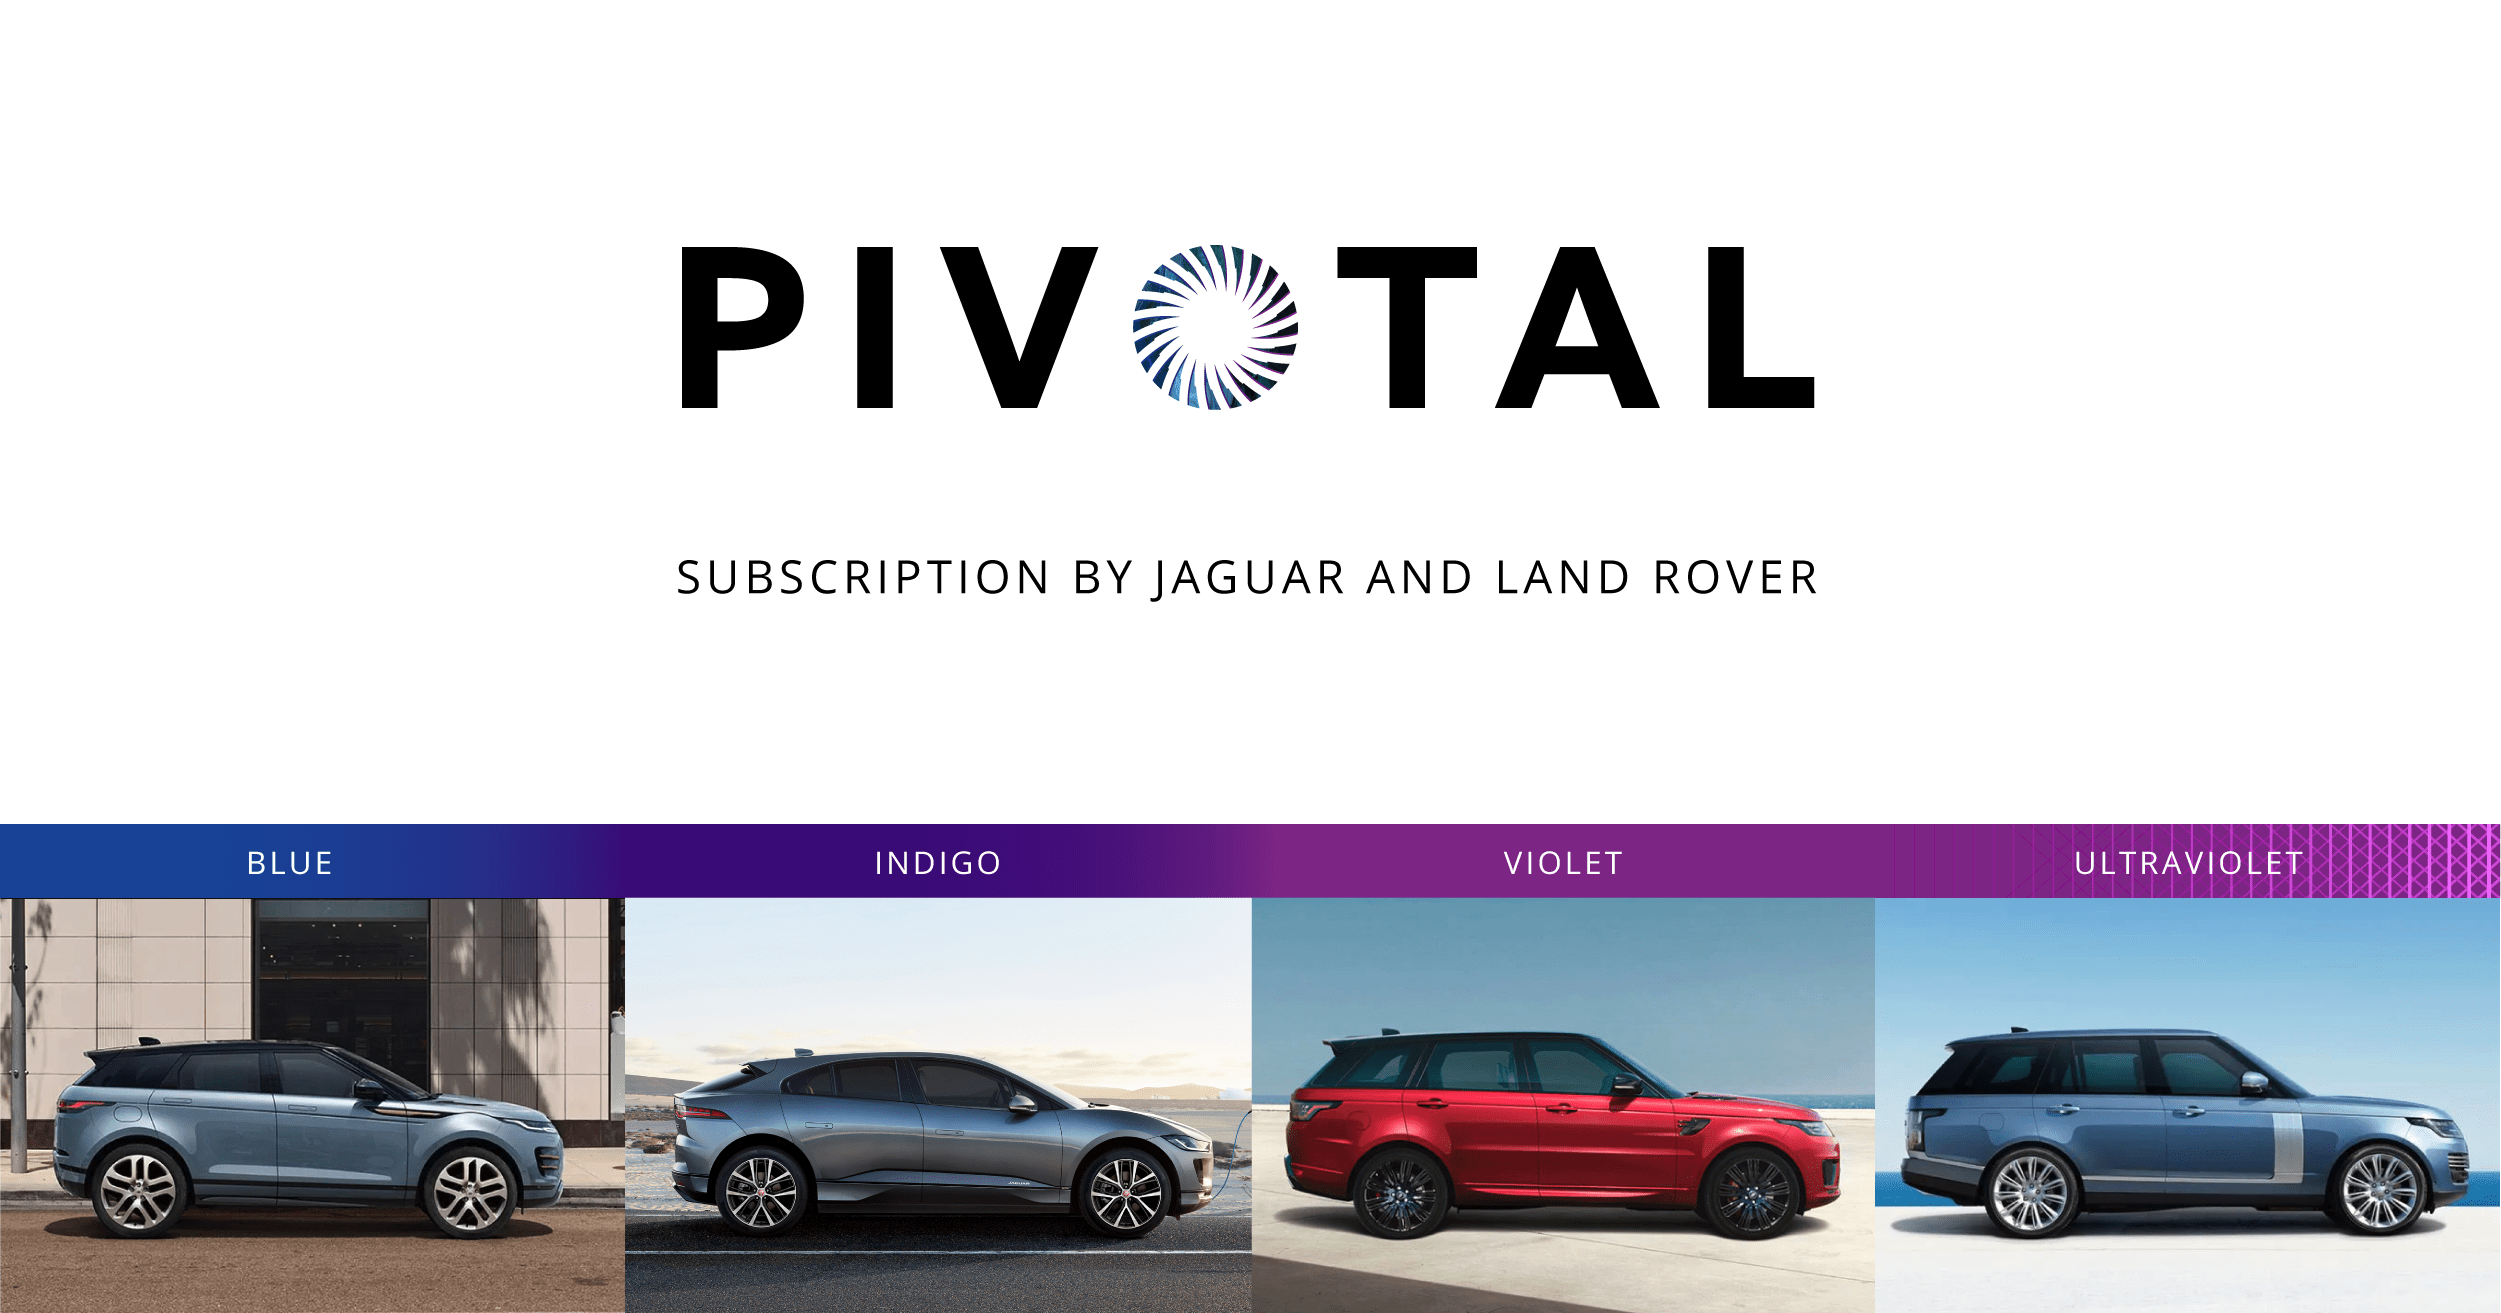 CUSTOMERS CHOOSE WITH JAGUAR LAND ROVER AND PIVOTAL SUBSCRIPTION-GO ELECTRIC OR GO OFF ROAD